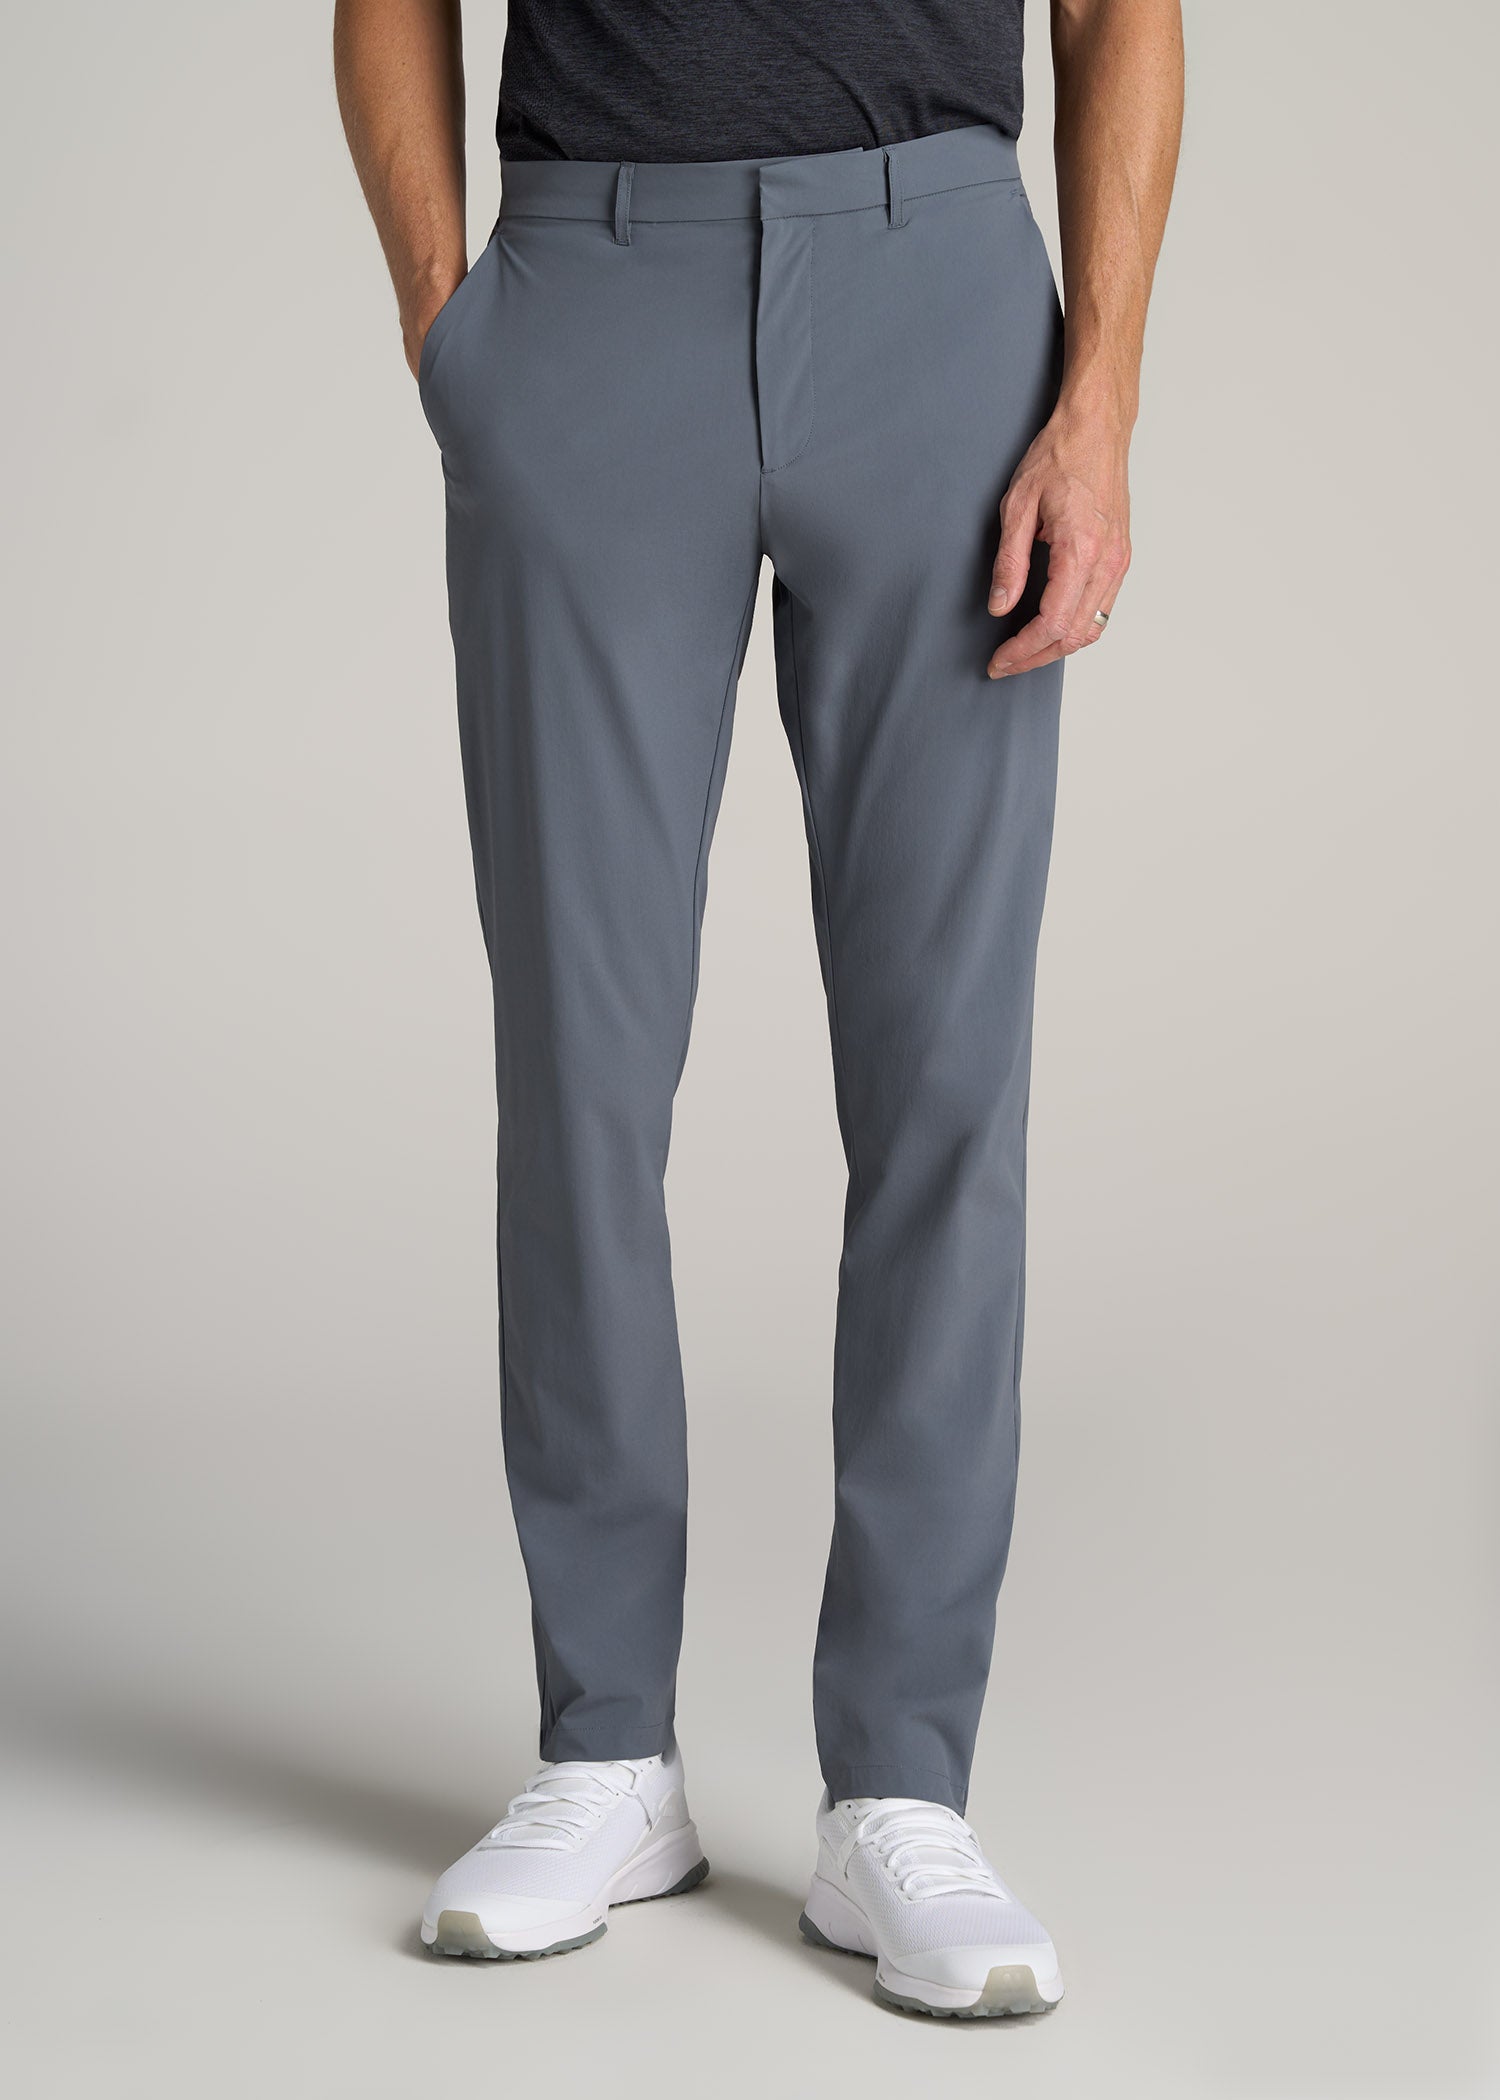 Performance TAPERED-FIT Chino Pants for Tall Men in Smoky Blue